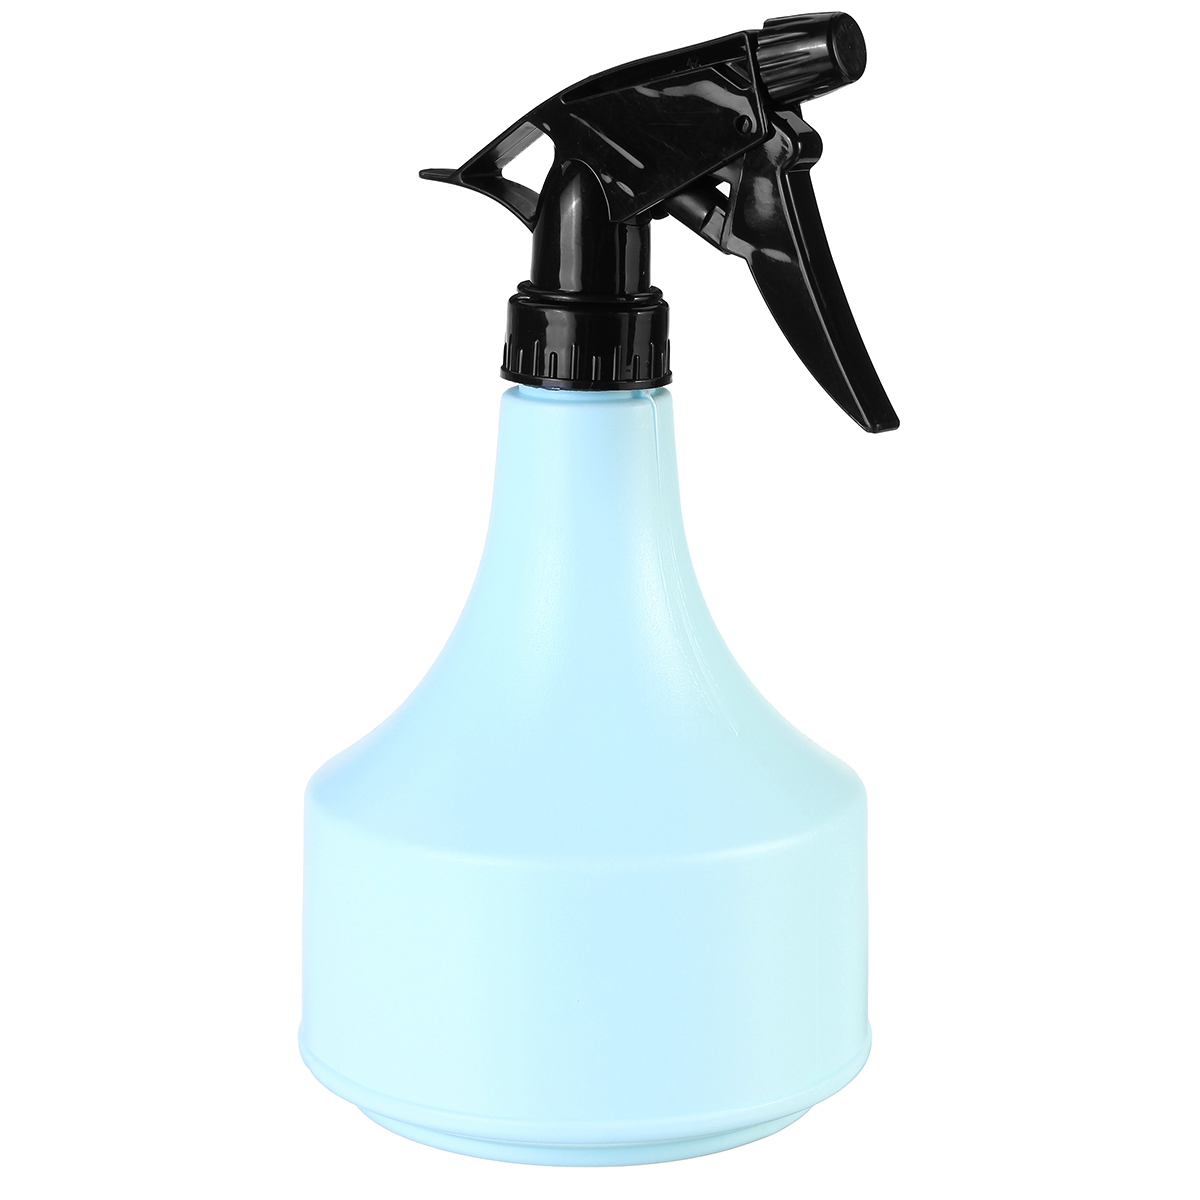 Watering-Spray-Bottle-Flowers-Shower-Watering-Can-Small-Gardening-Can-1741178